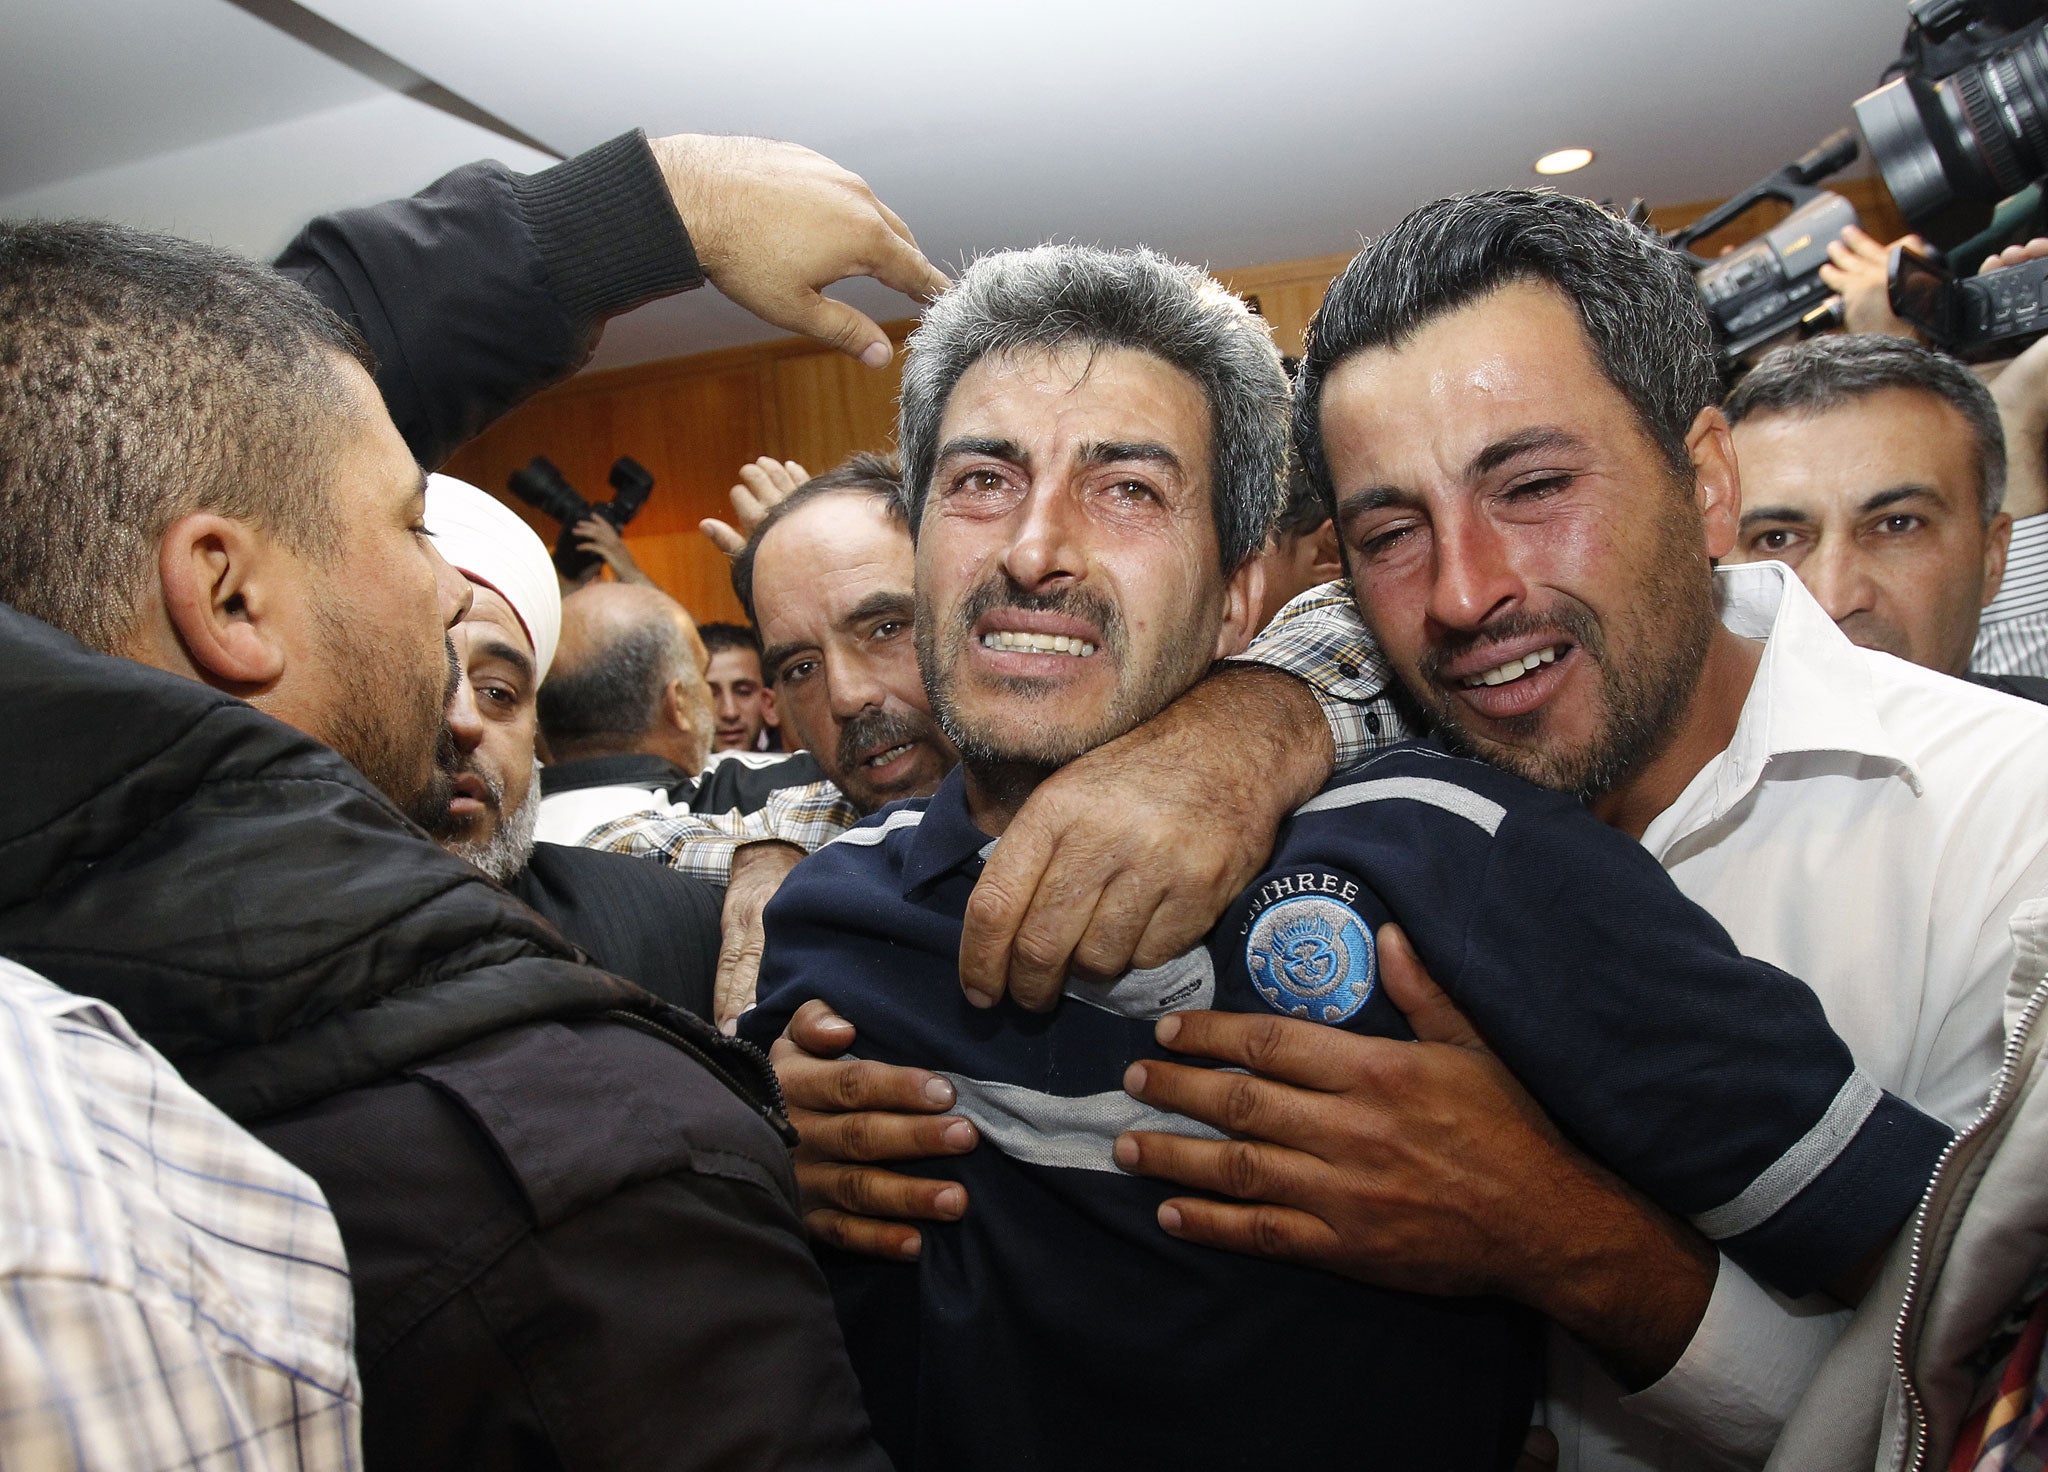 A survivor of the shipwreck arrives at Beirut airport